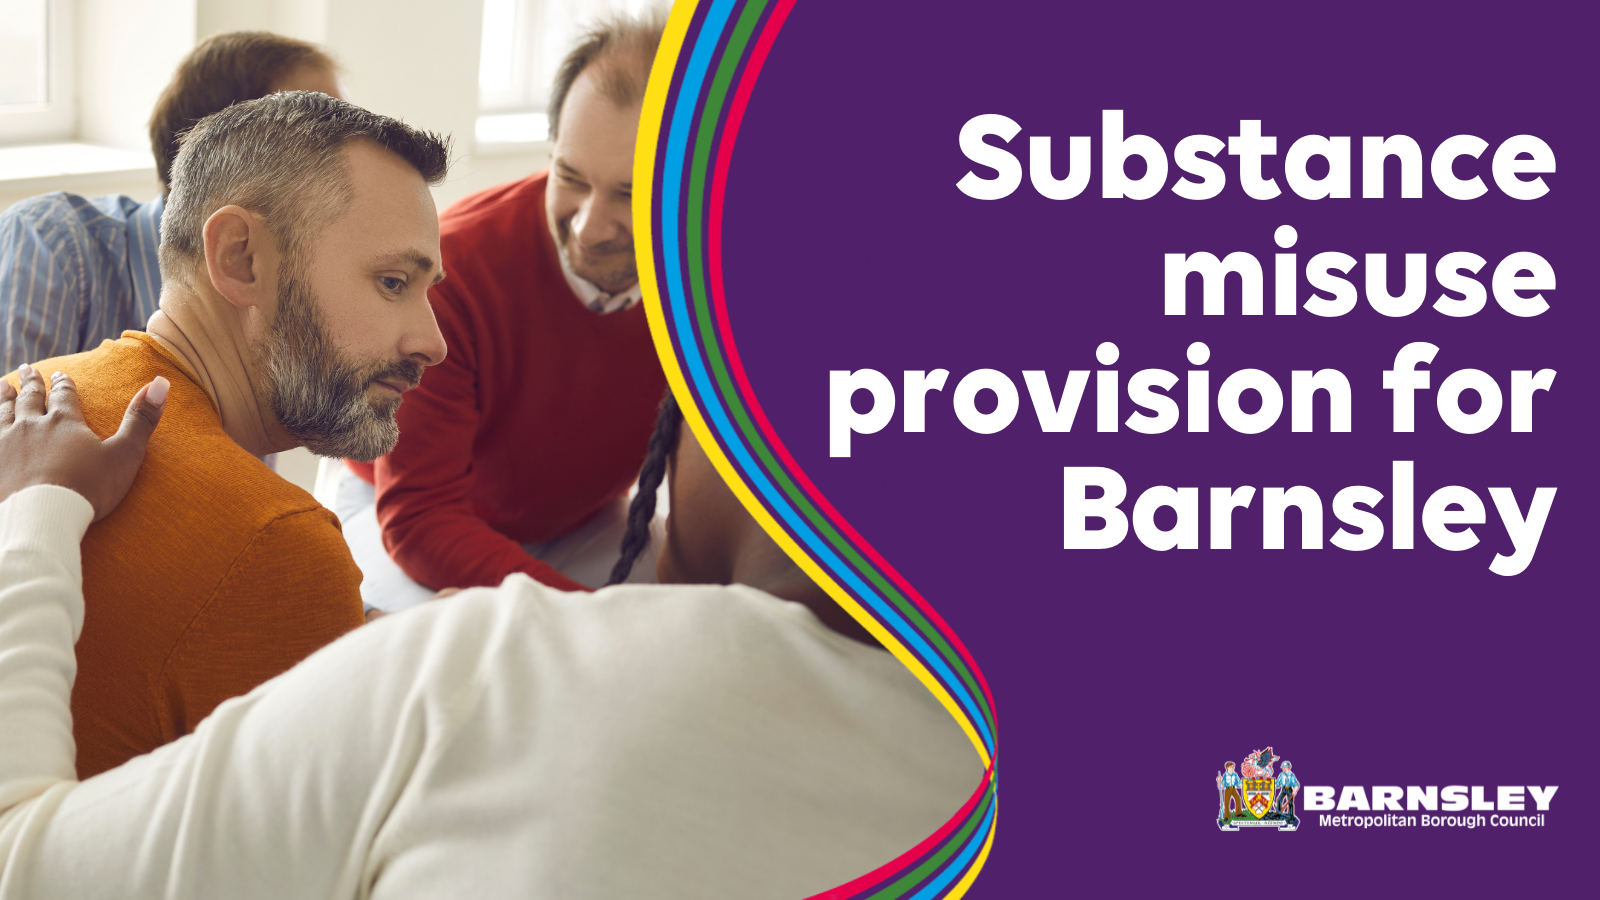 Substance misuse provision for Barnsley